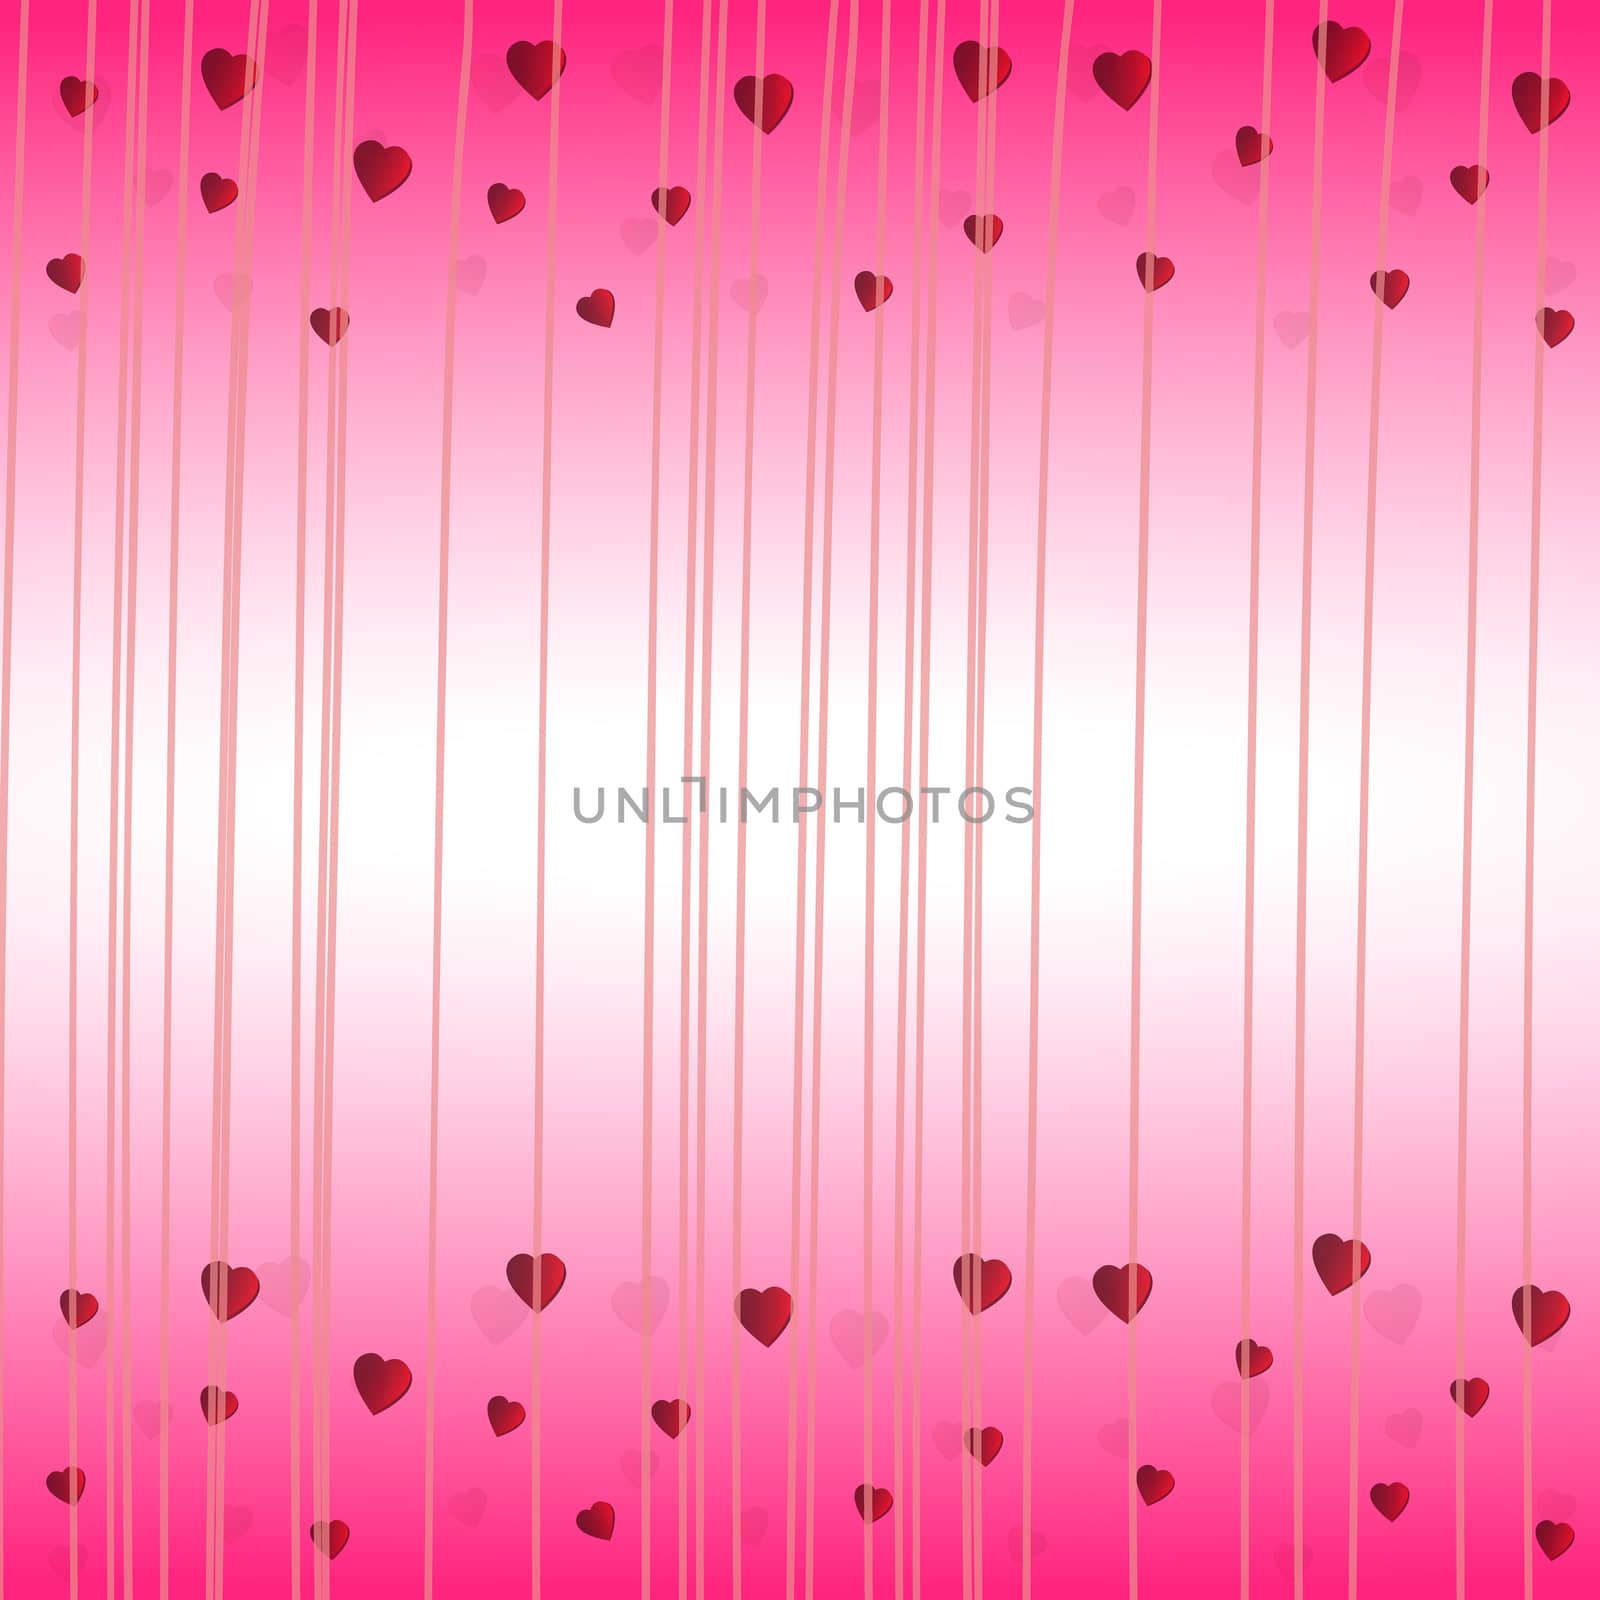 Red hearts concept on Valentine's day background.Vector EPS10. by toodlingstudio